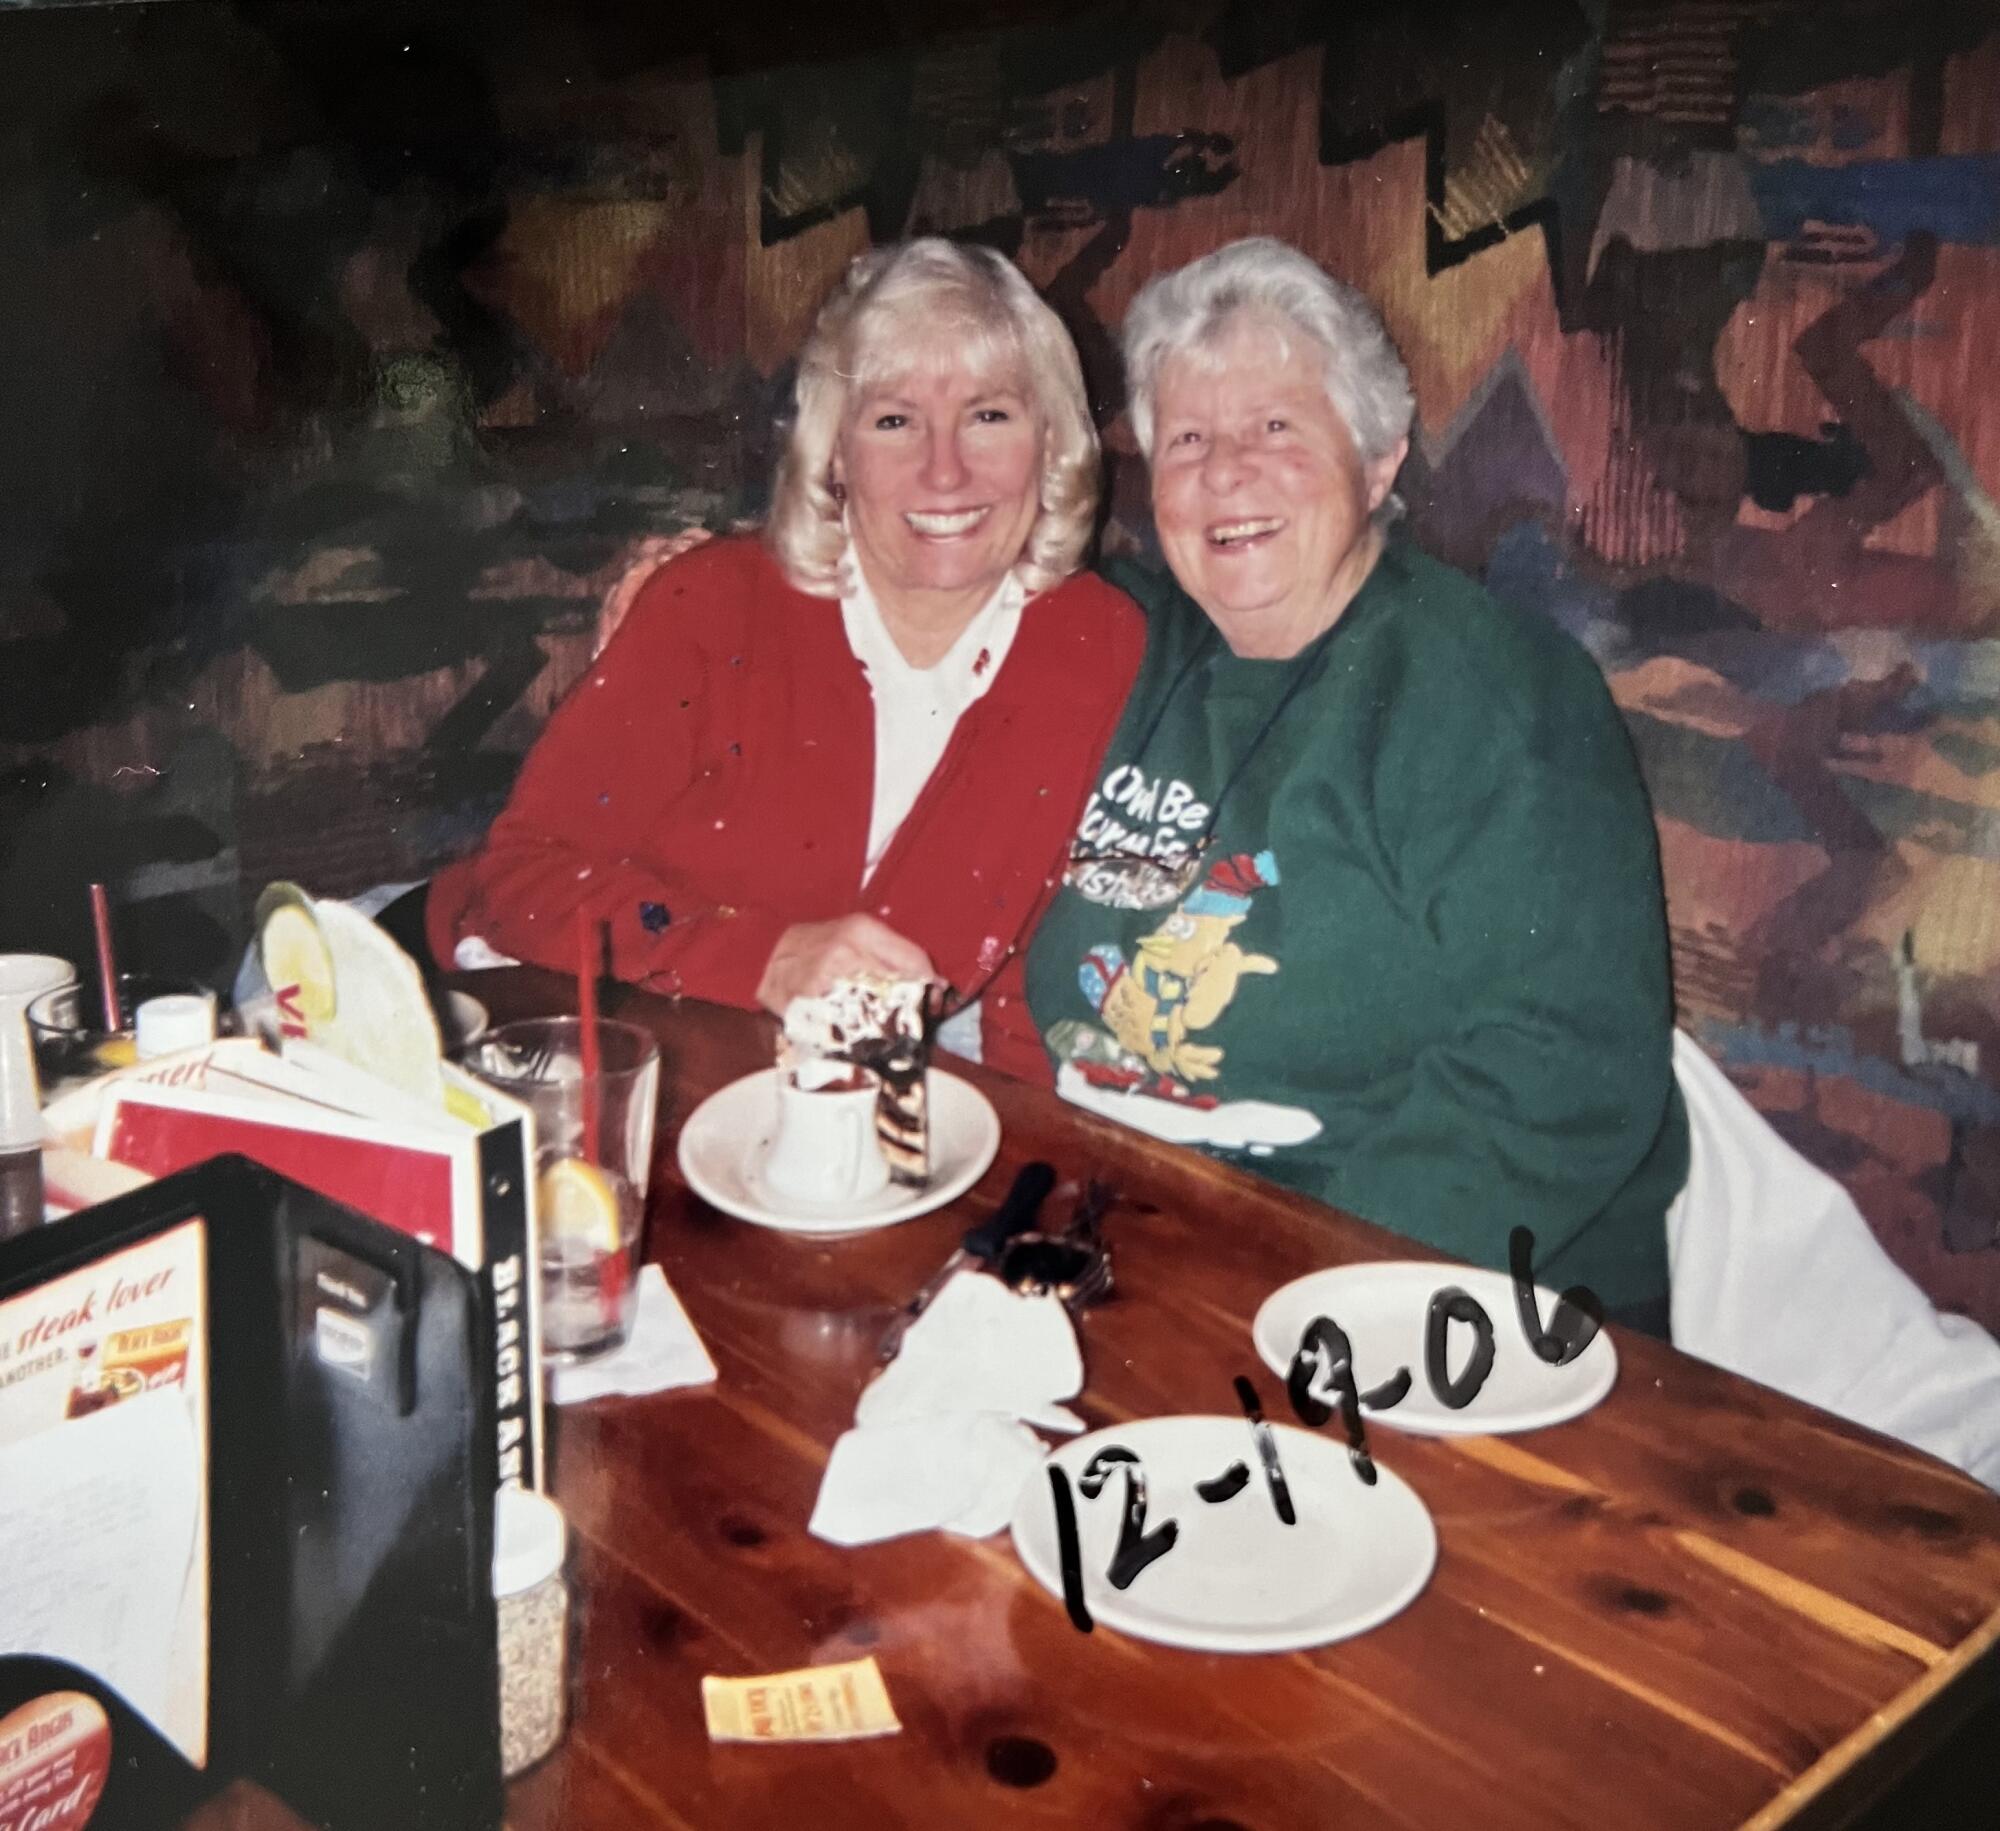 Two women smile and hug while sitting at a table.